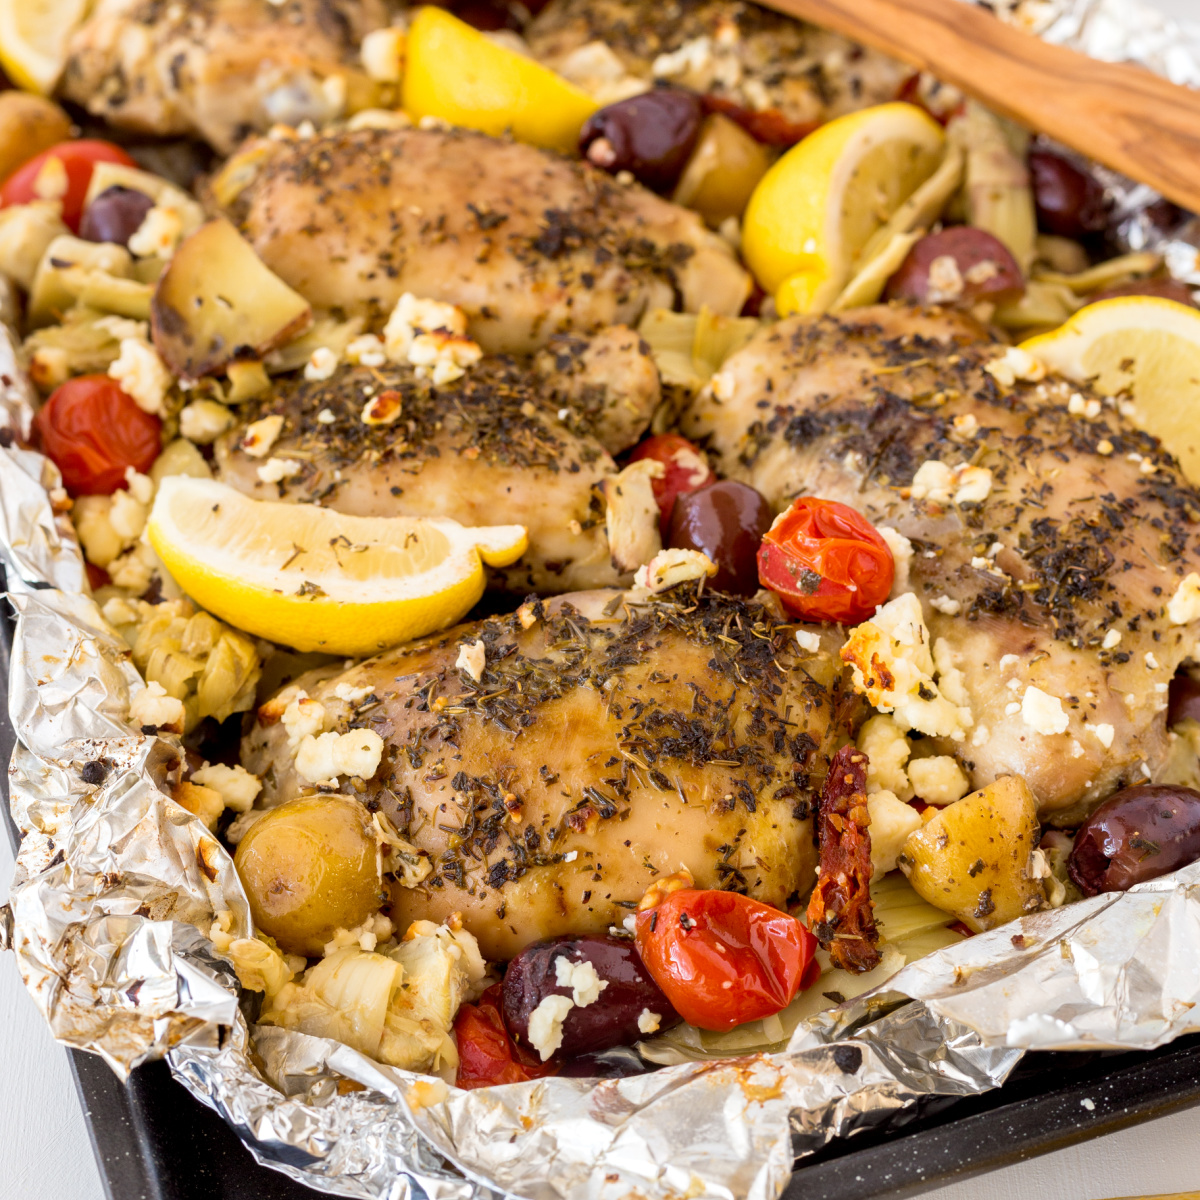 Greek chicken foil pack just off the grill garnished with lemon wedges.